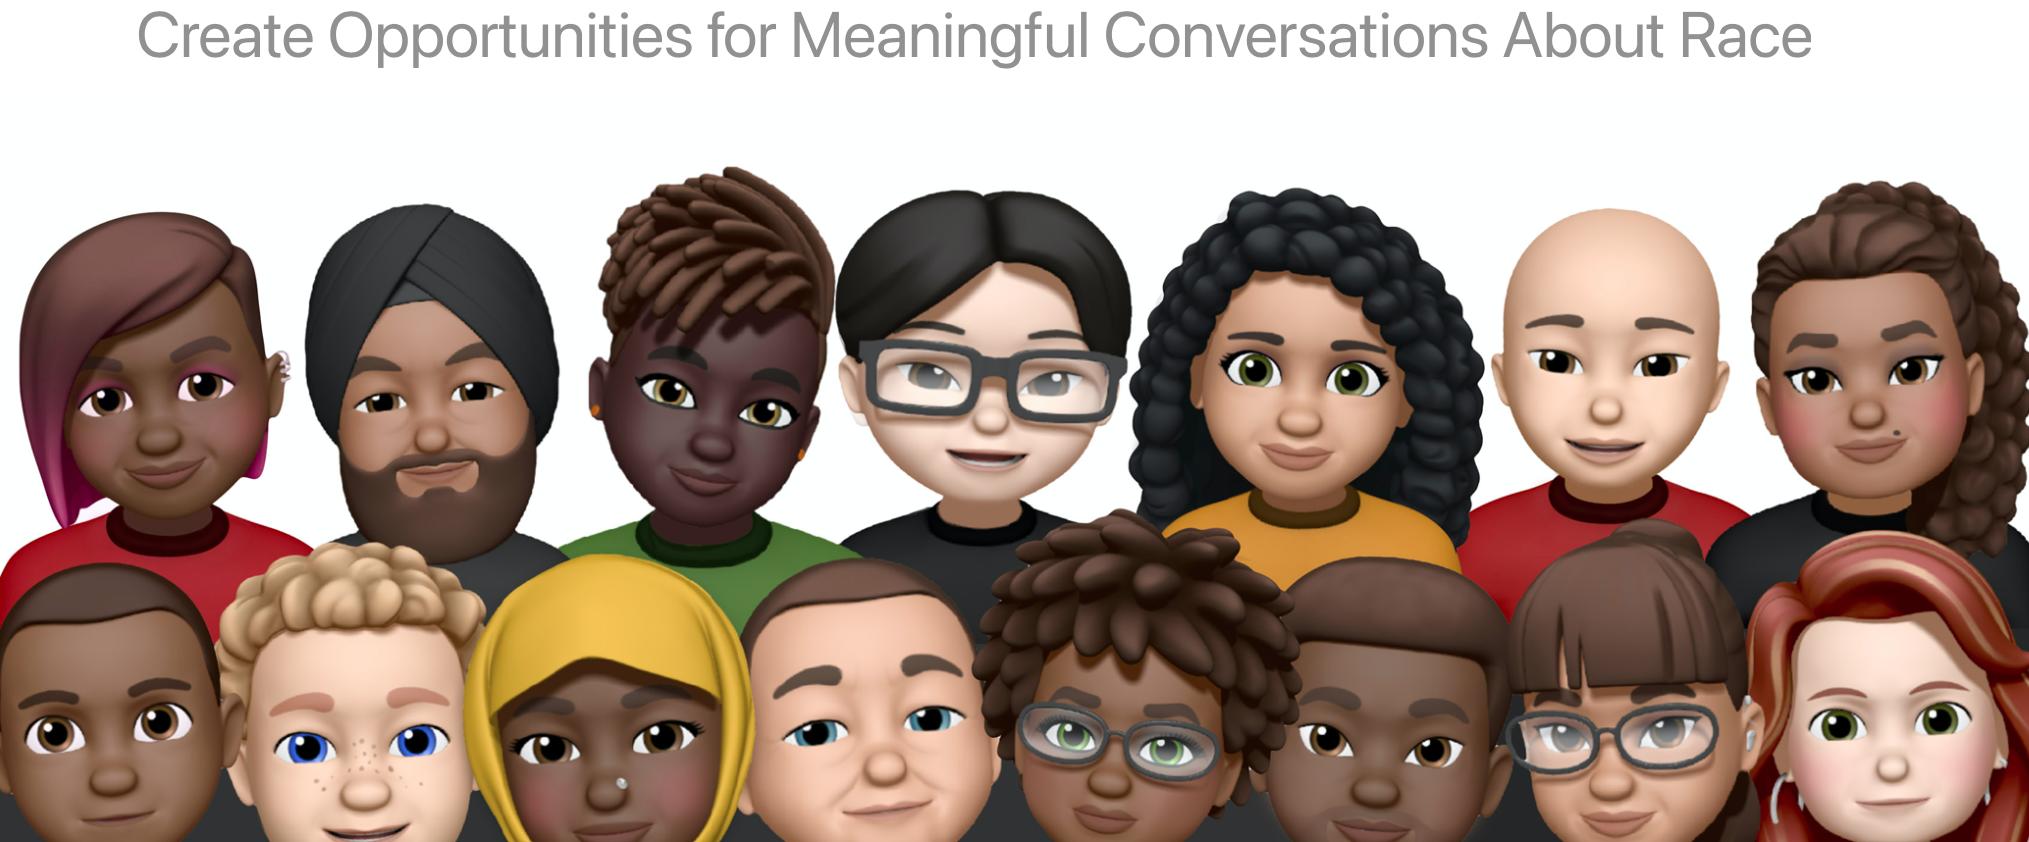 Apple Racial Equity And Justice Resources